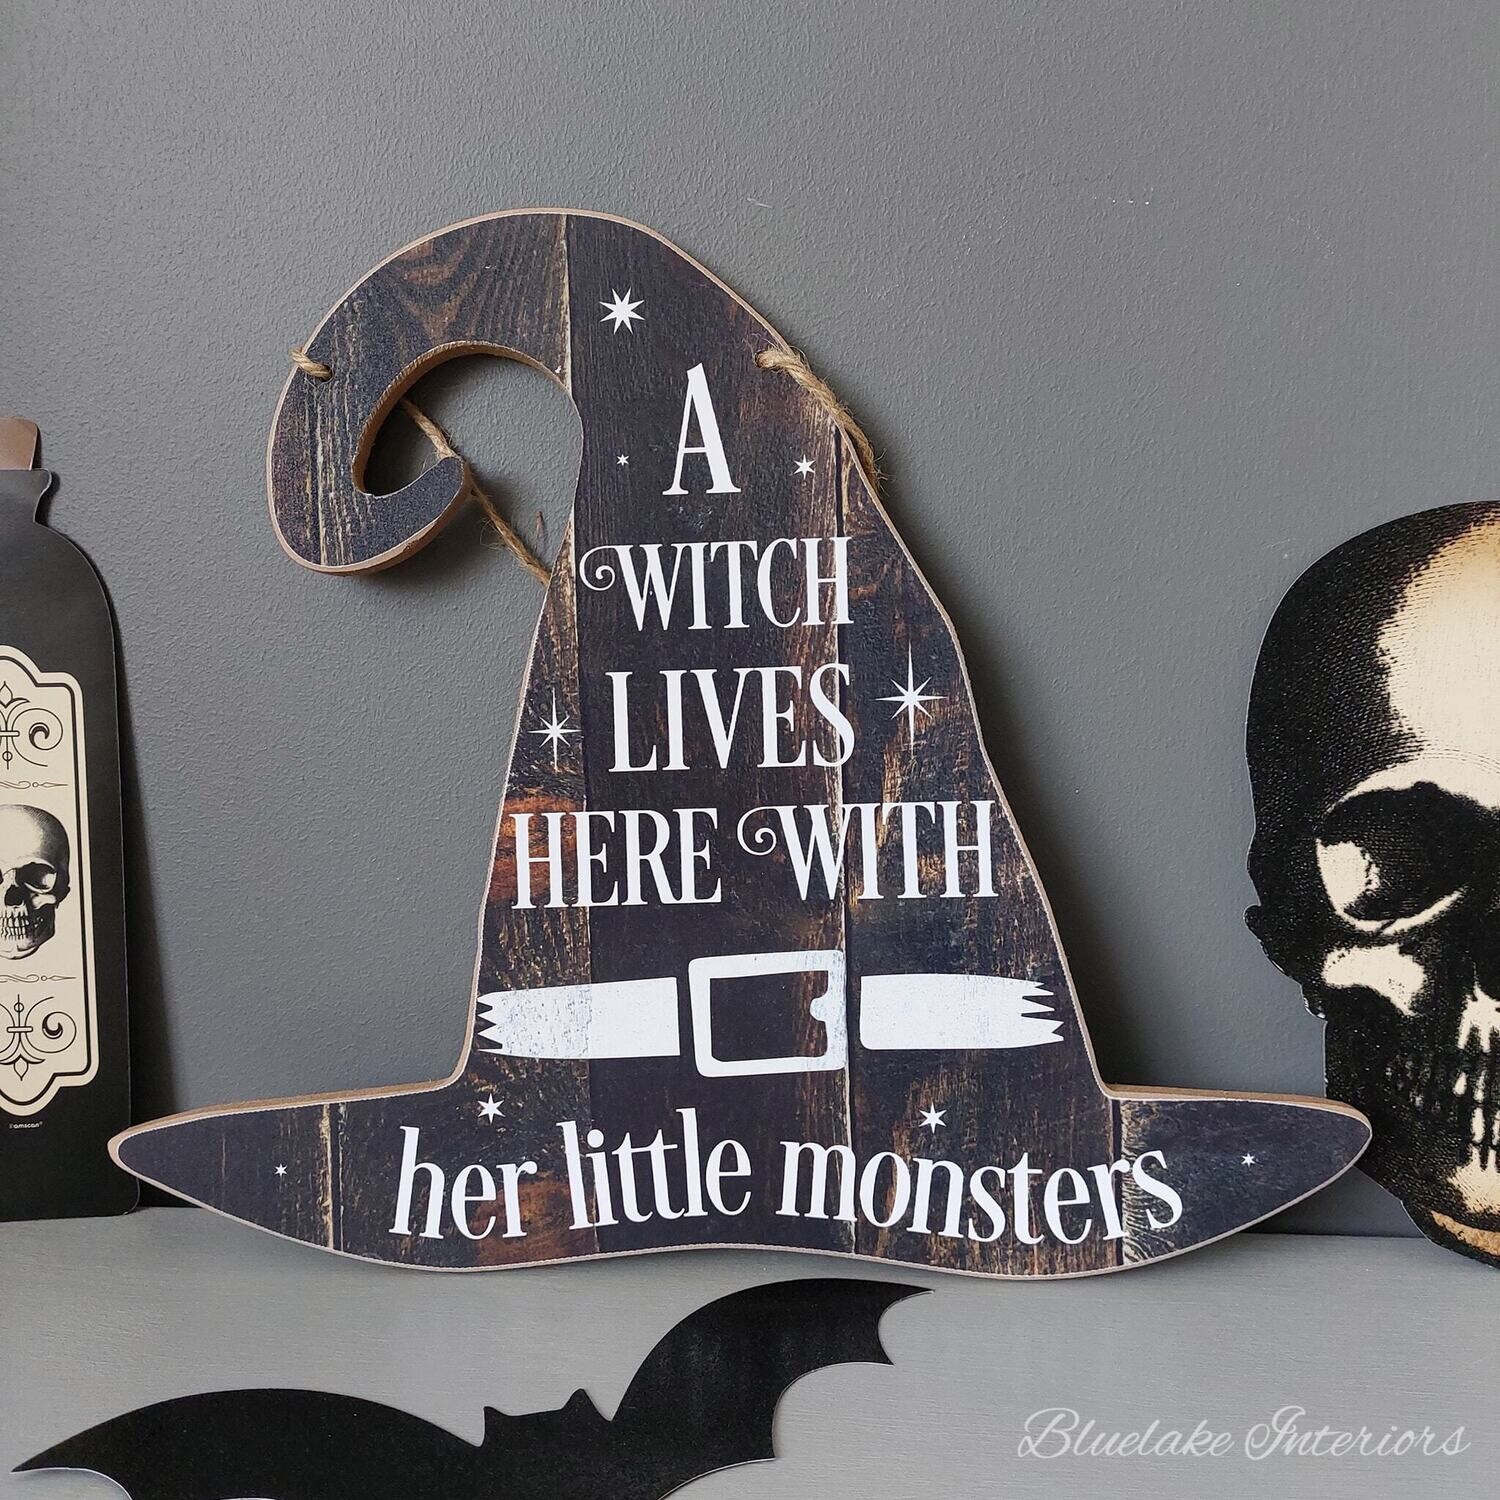 A Witch Lives Here With Her Little Monsters Halloween Wall Plaque